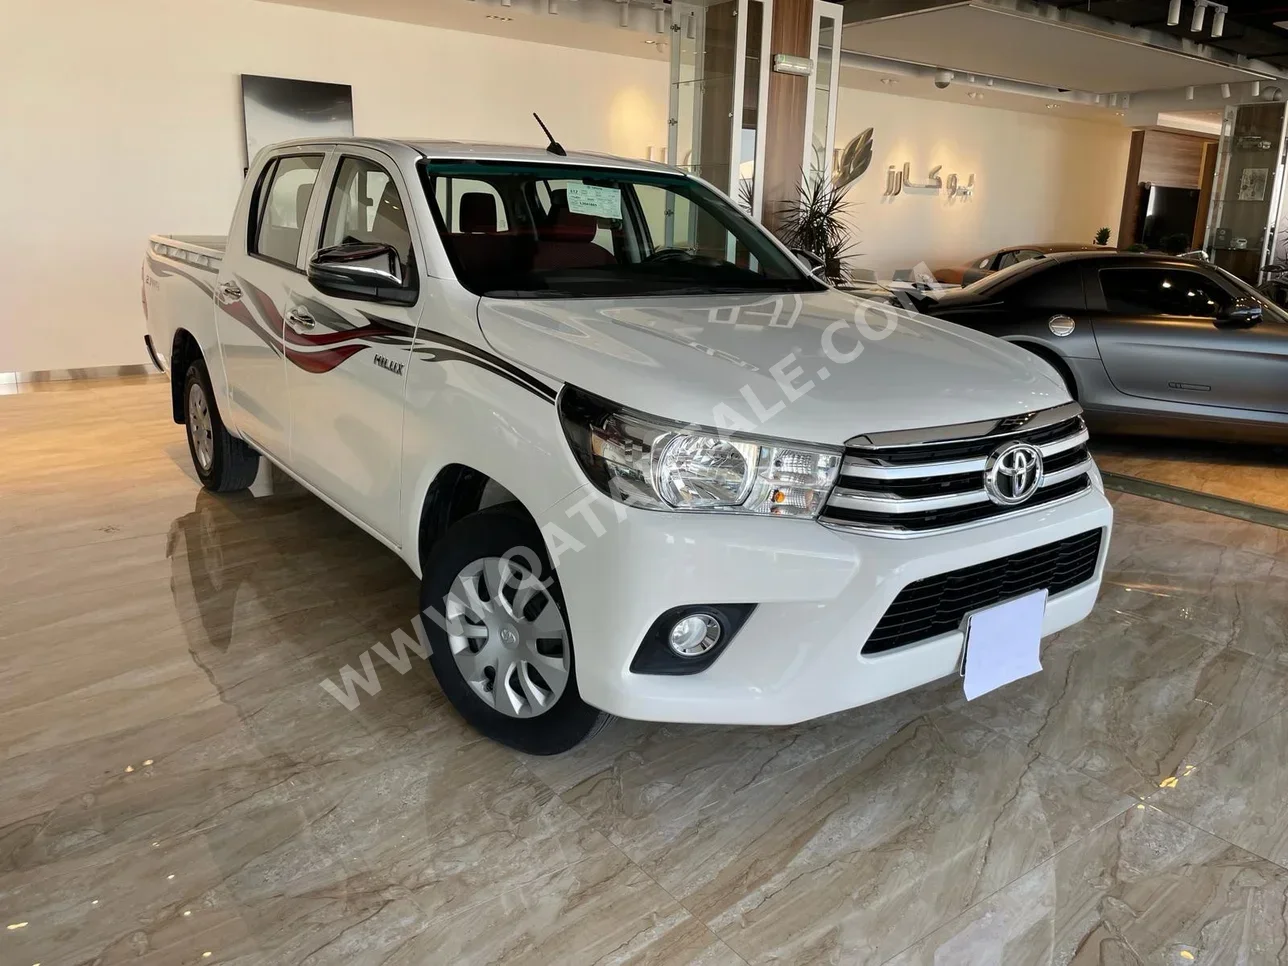 Toyota  Hilux  2020  Automatic  29,000 Km  4 Cylinder  Rear Wheel Drive (RWD)  Pick Up  White